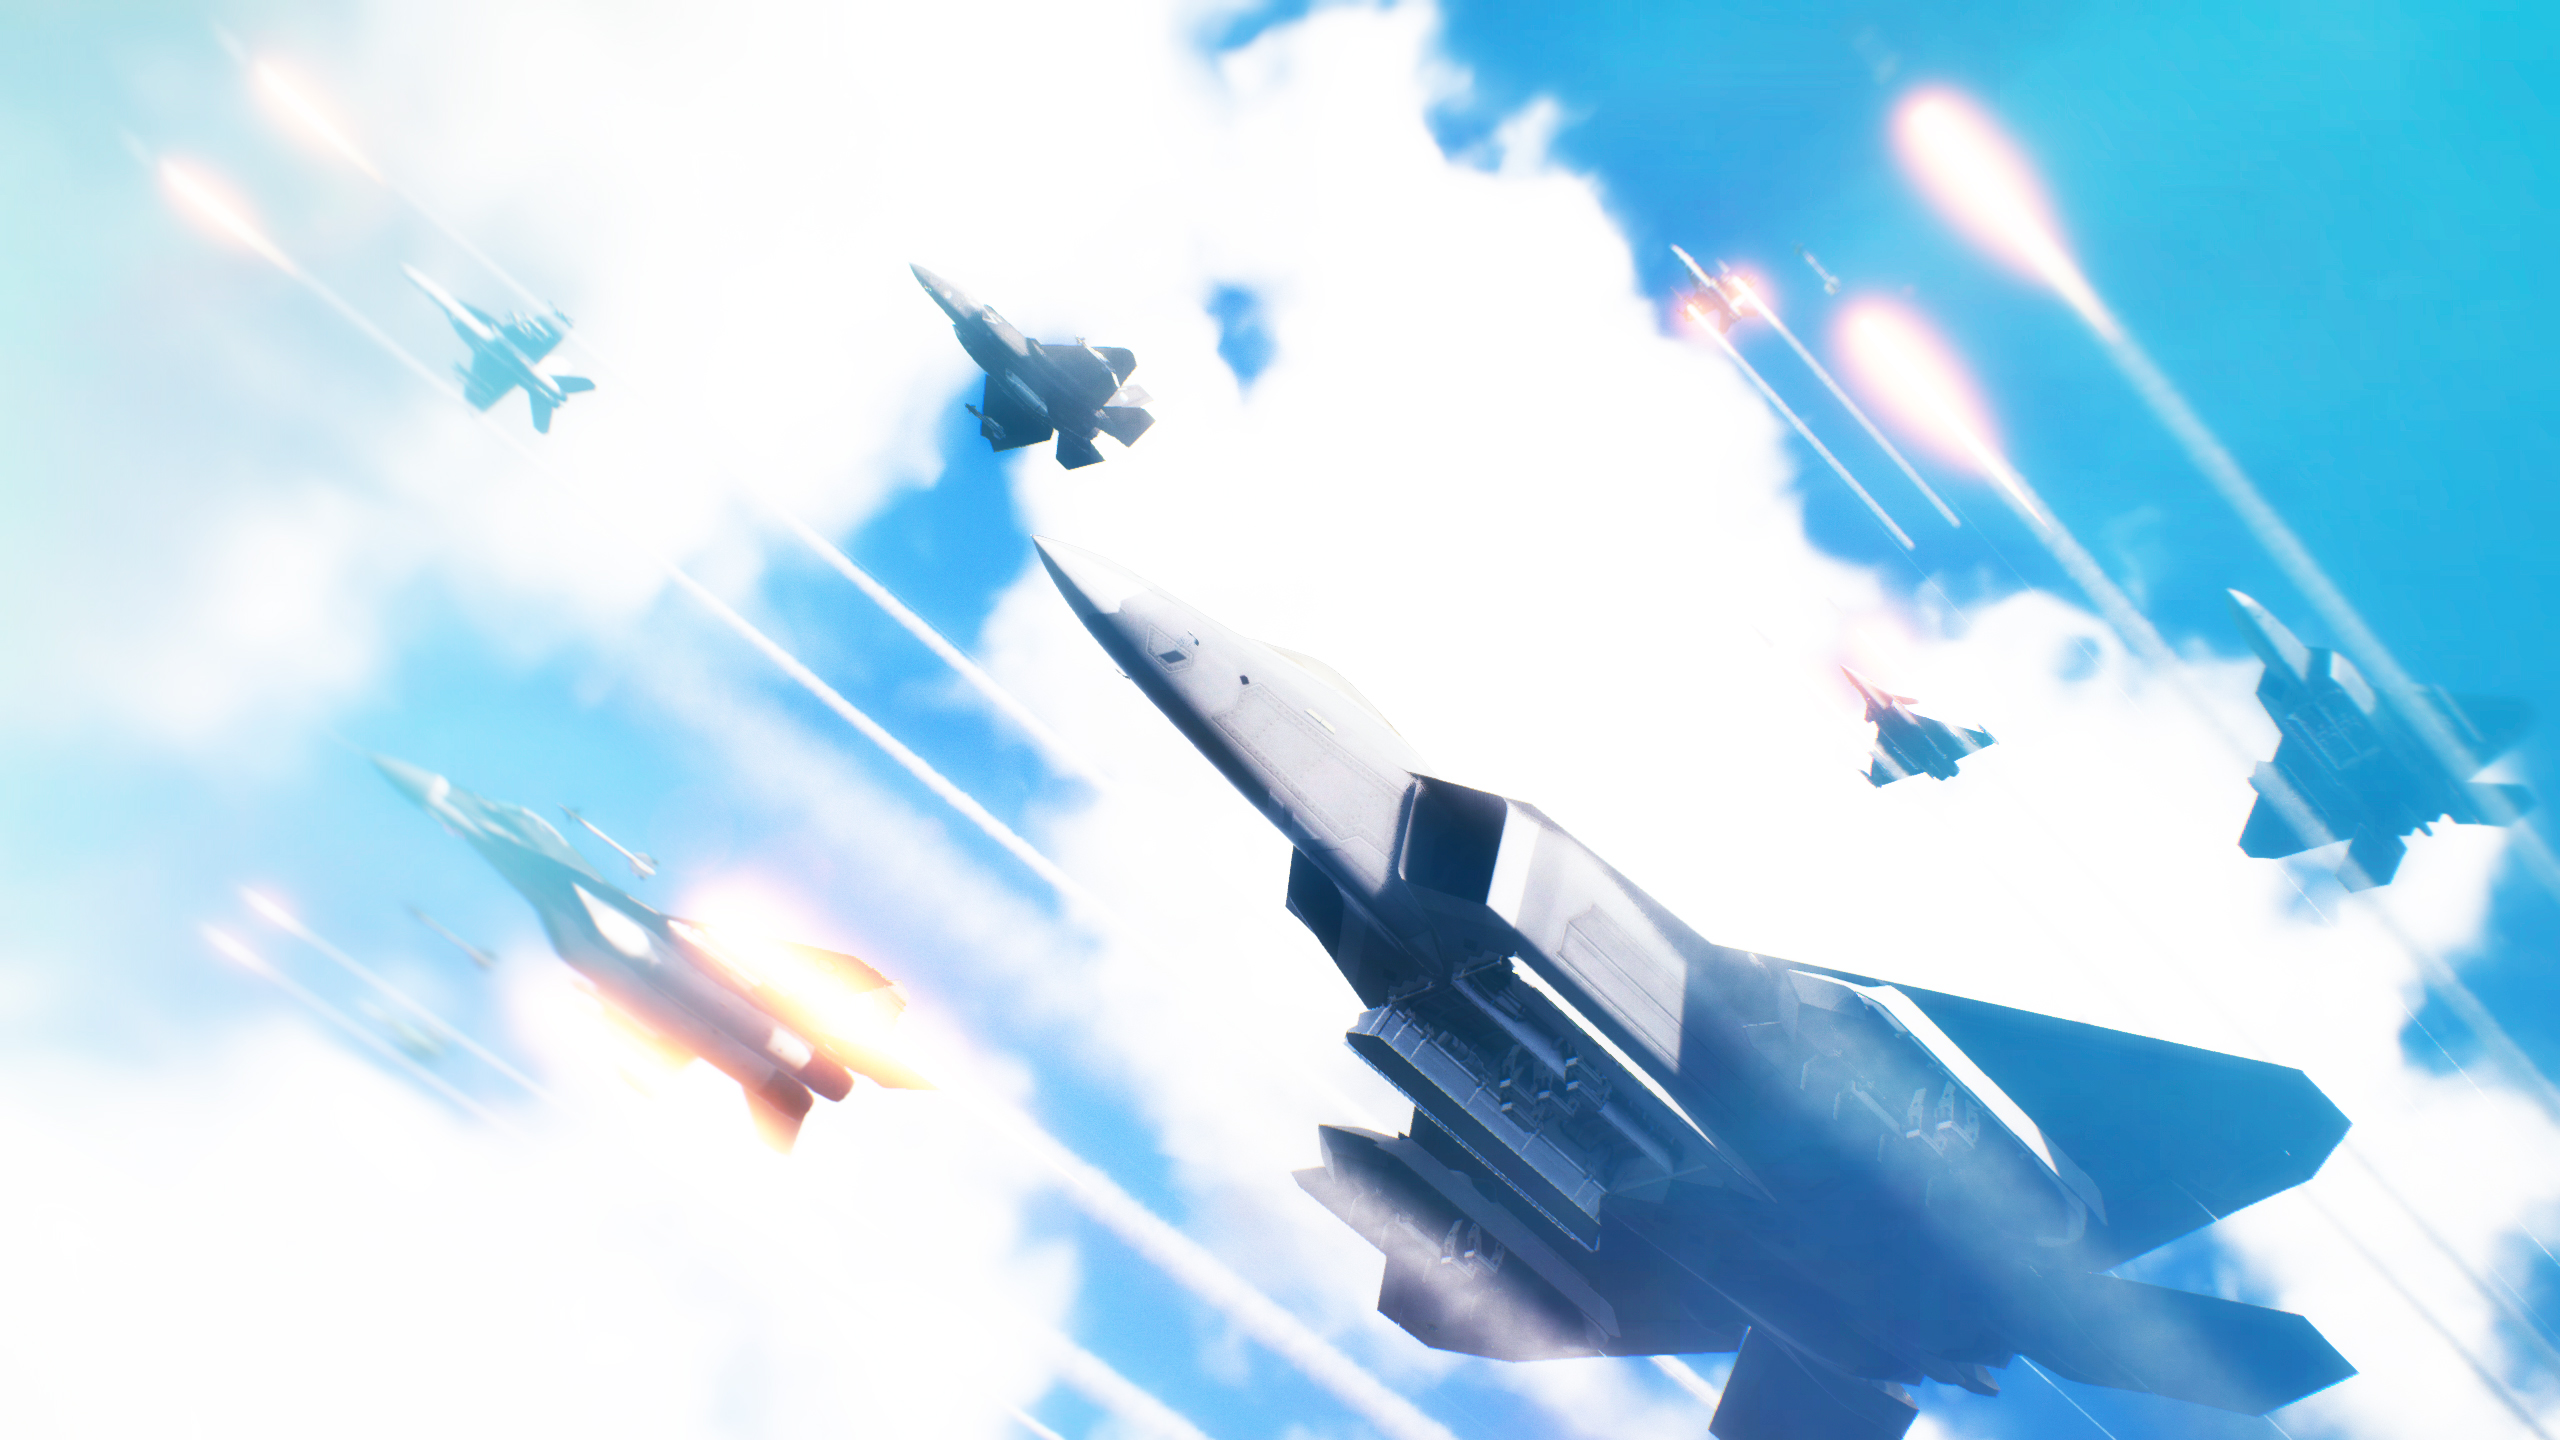 General 2560x1440 Ace Combat Ace Combat 7 jet fighter video games video game art aircraft military vehicle military aircraft military vehicle F-22 Raptor